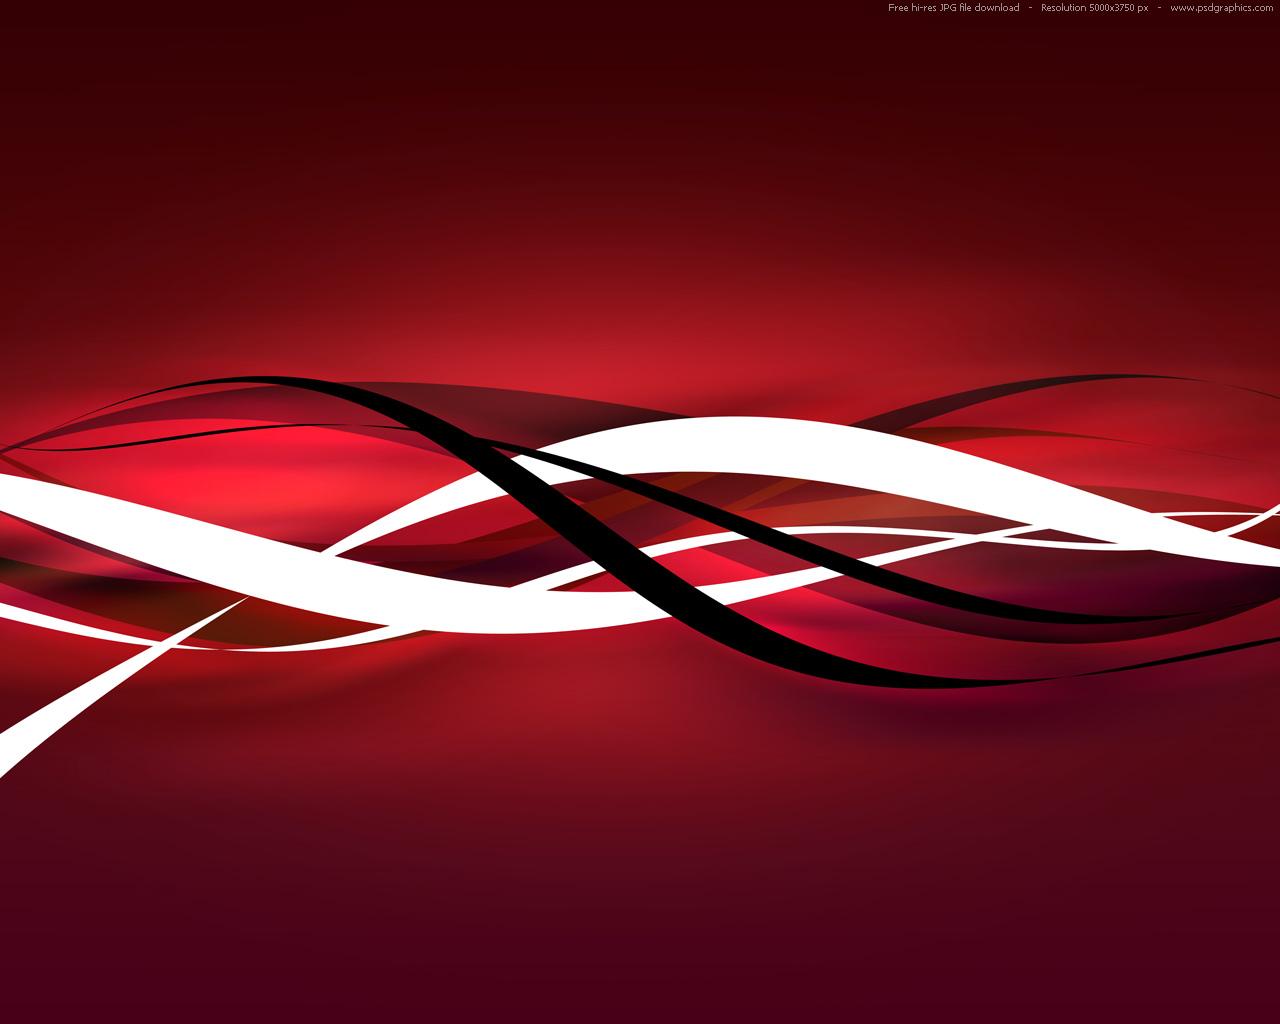 Abstract Background Red Hd Cool 7 Hd Wallpapers | HD Wallpapers Range